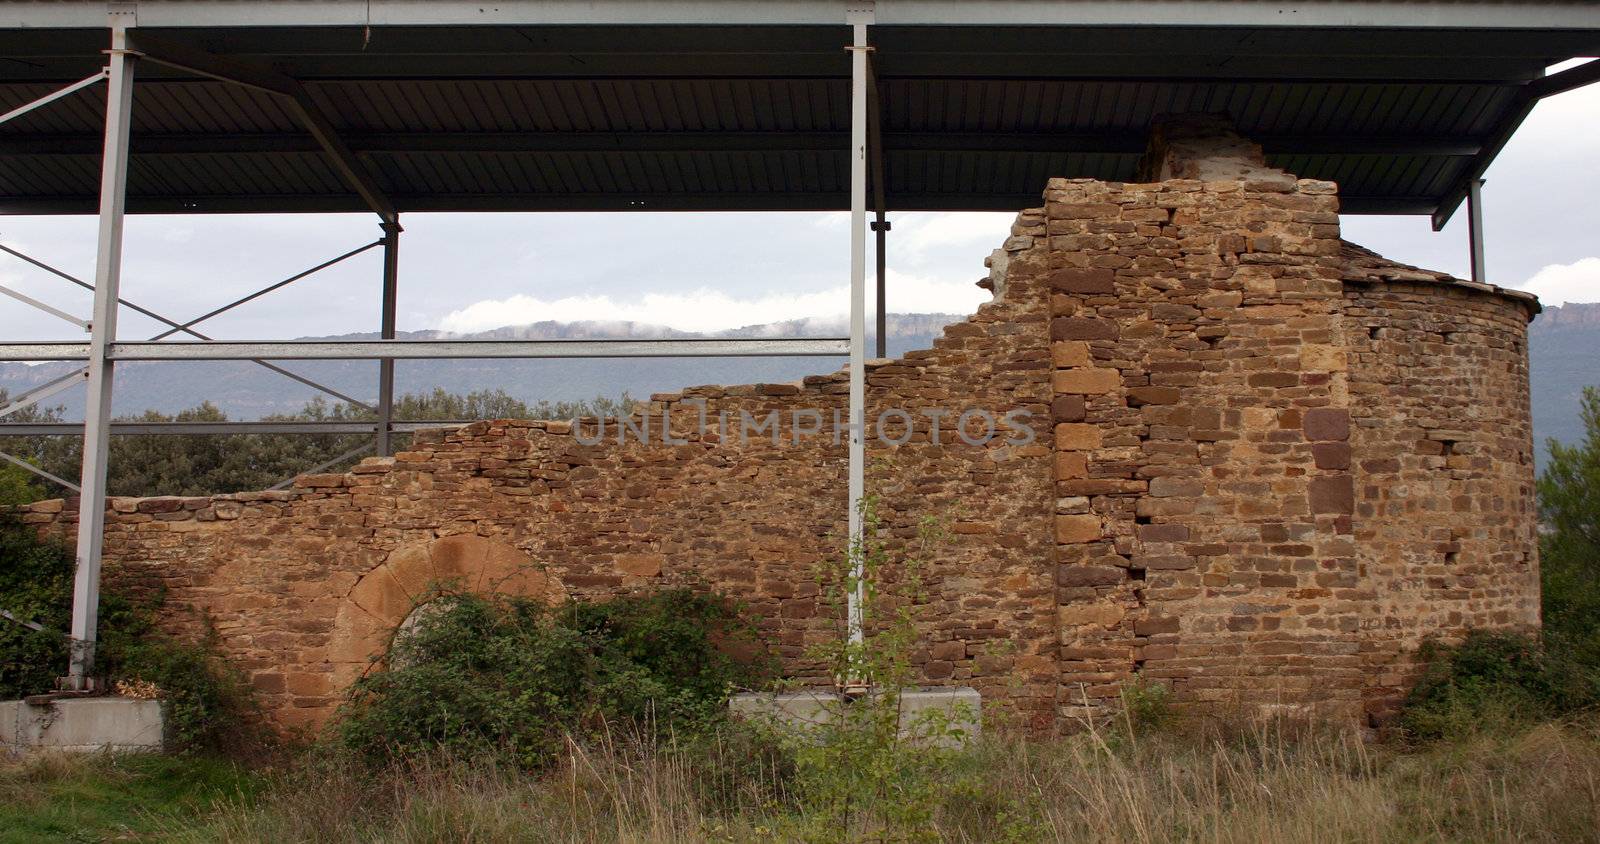 ruined chapel in Spain, sheltered by a metal roof, waiting for repair